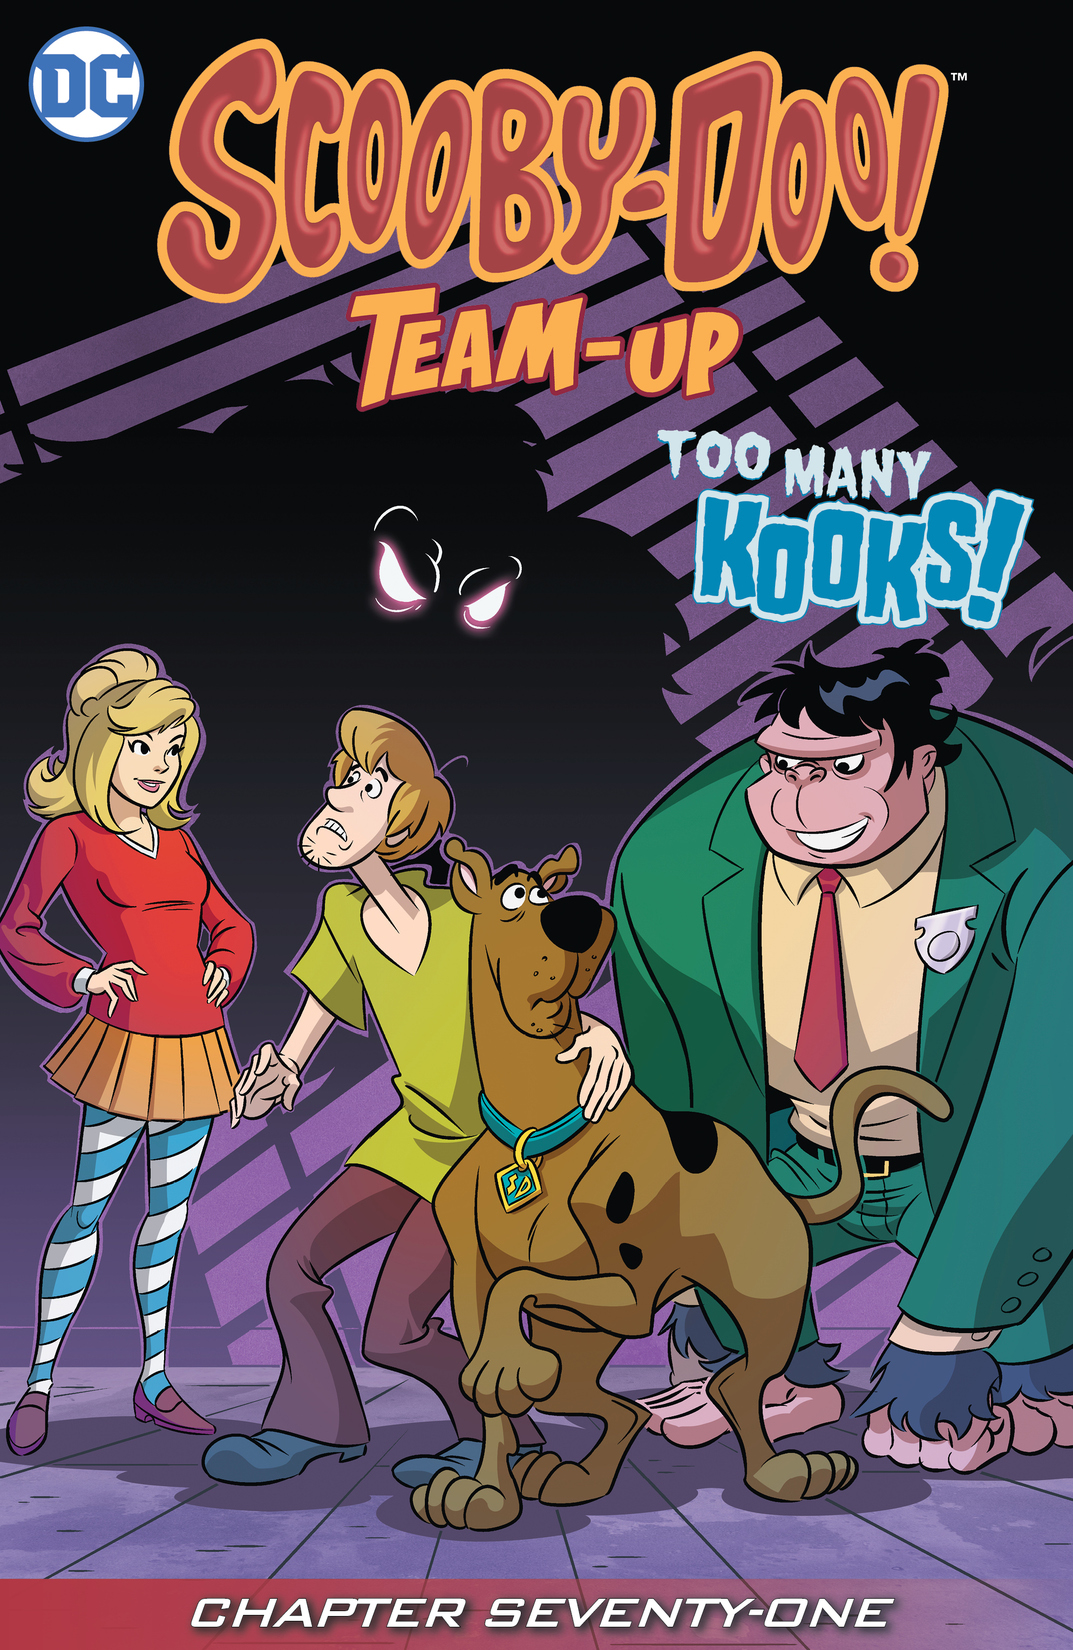 Scooby-Doo Team-Up #71 preview images